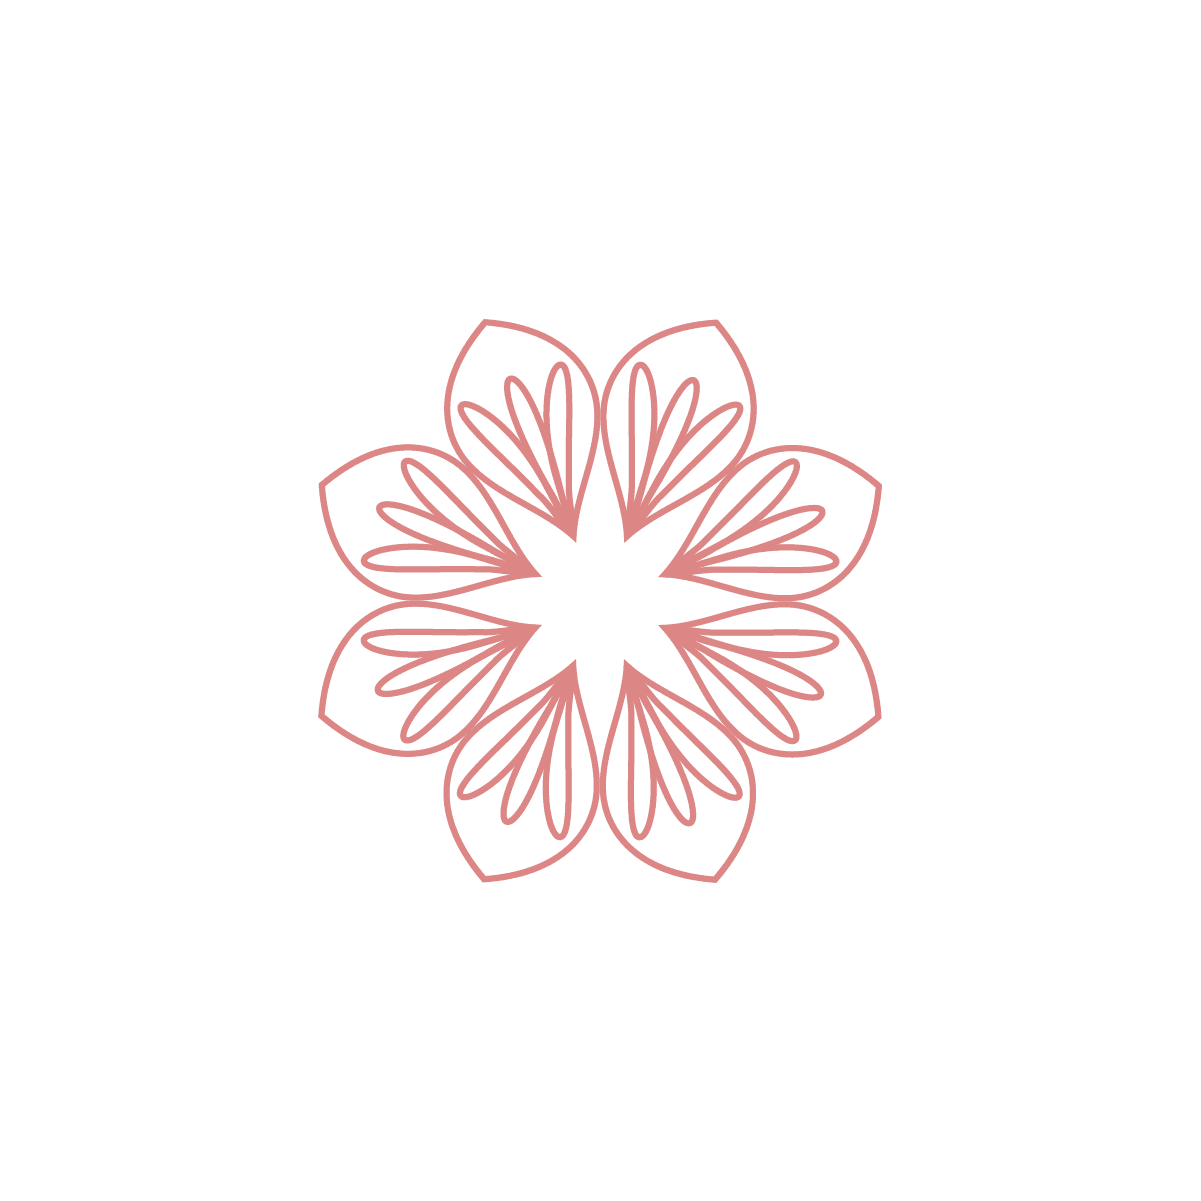 intricate floral mandalas in minimalist style with delicate linework